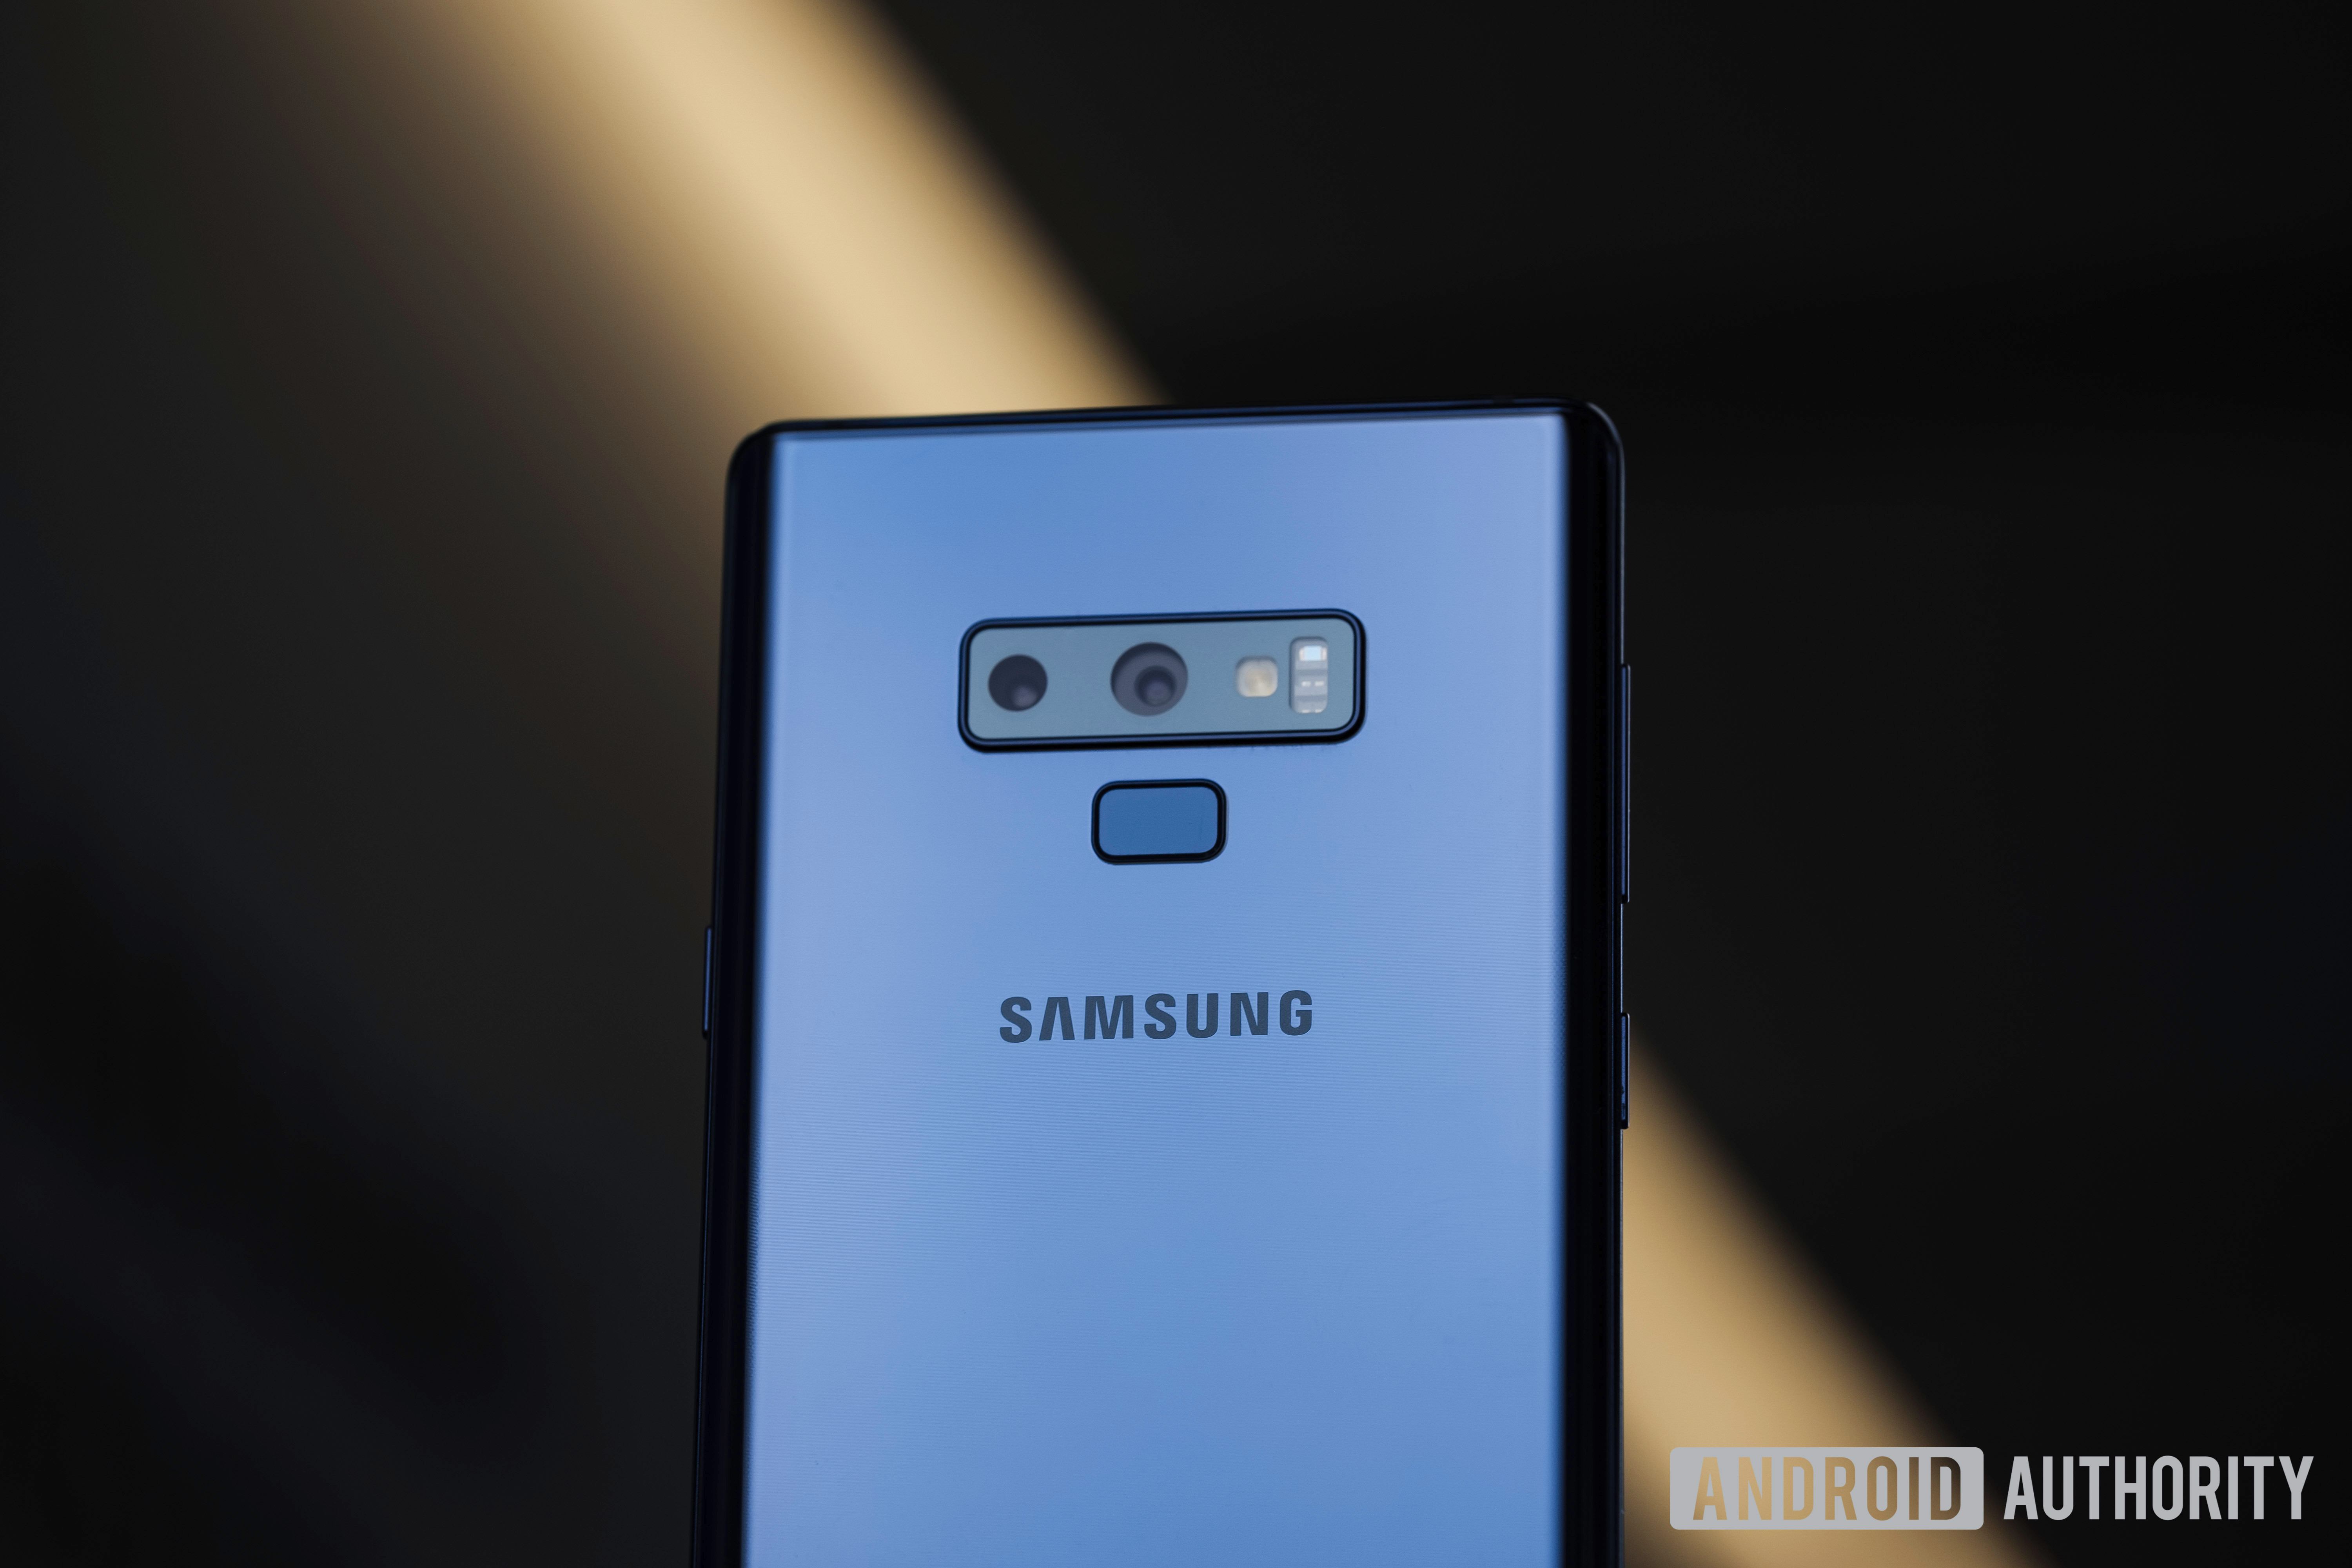 It's claimed that the Galaxy Note 10 will get an extra aperture option compared to the Galaxy Note 9.